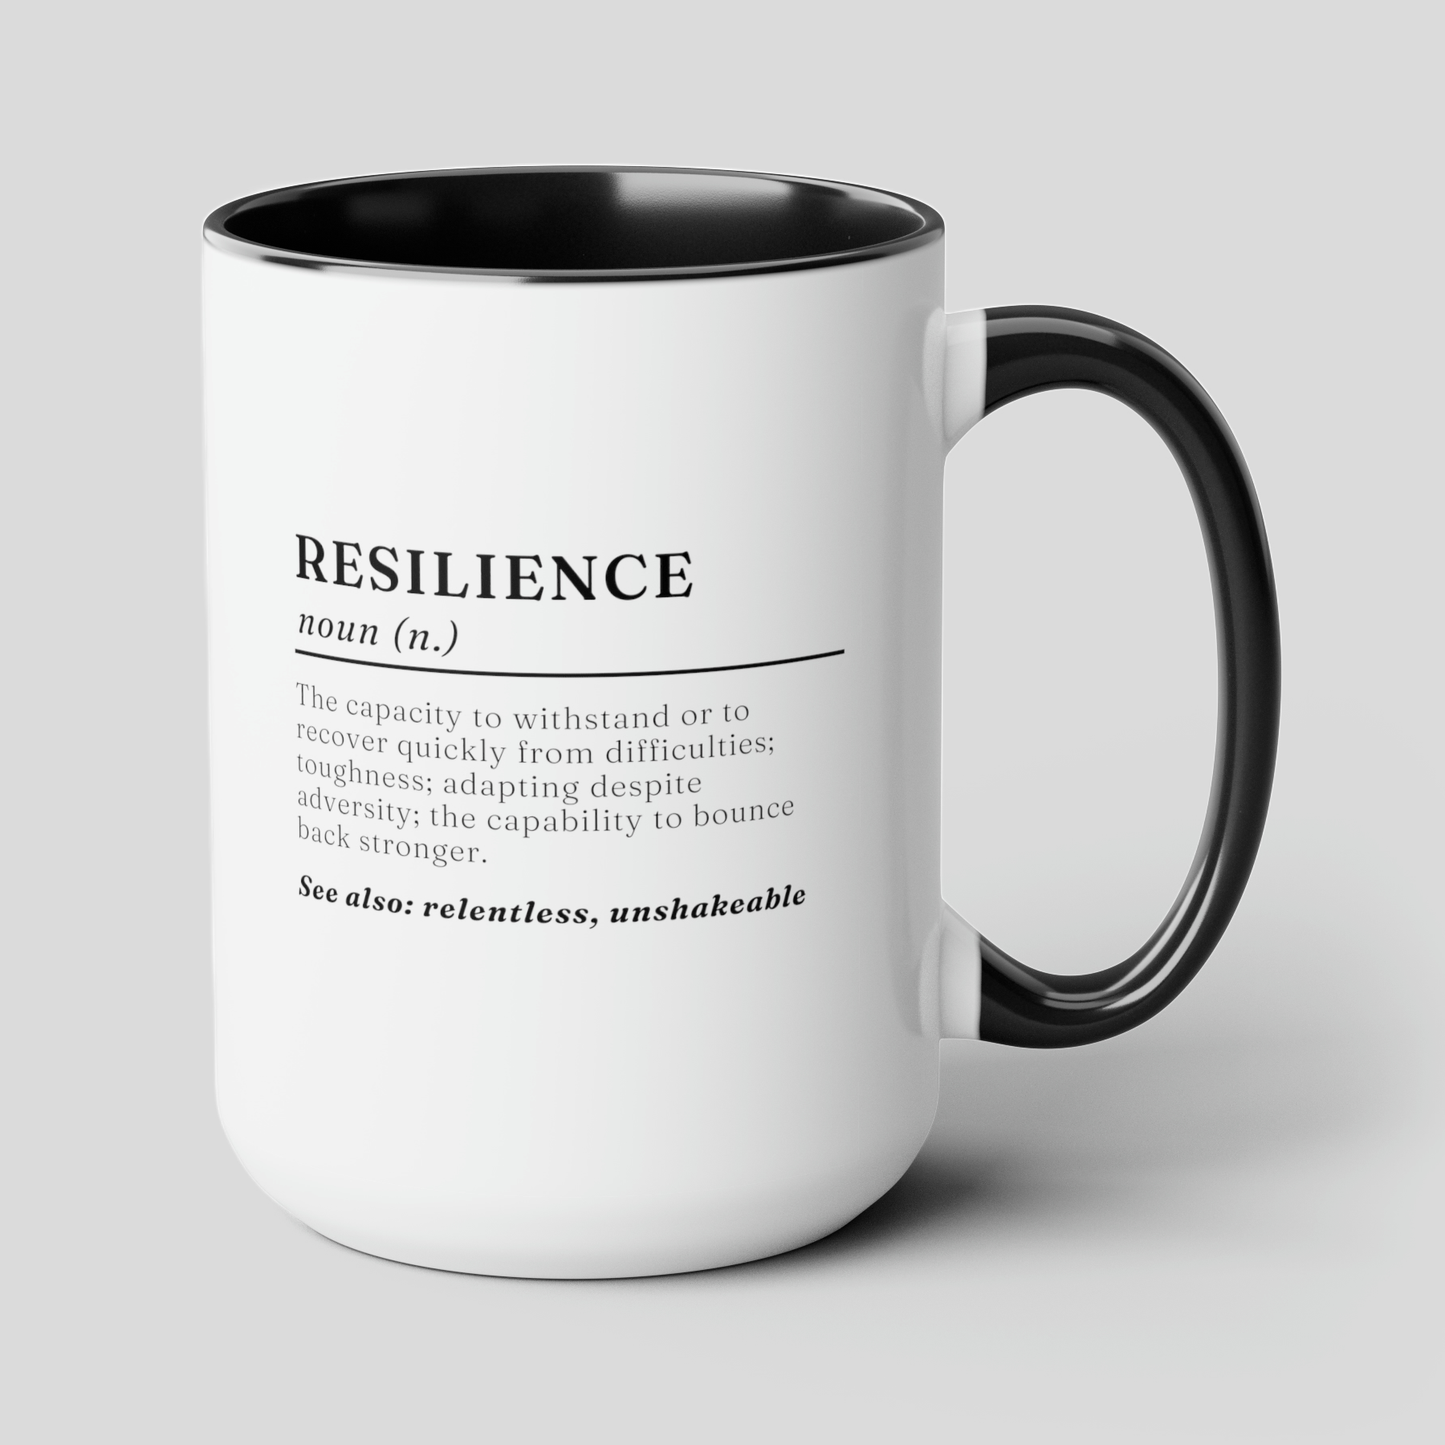 Resilience Definition 15oz white with black accent funny large coffee mug gift for friend support perseverance meaning motivational inspirational tough waveywares wavey wares wavywares wavy wares cover